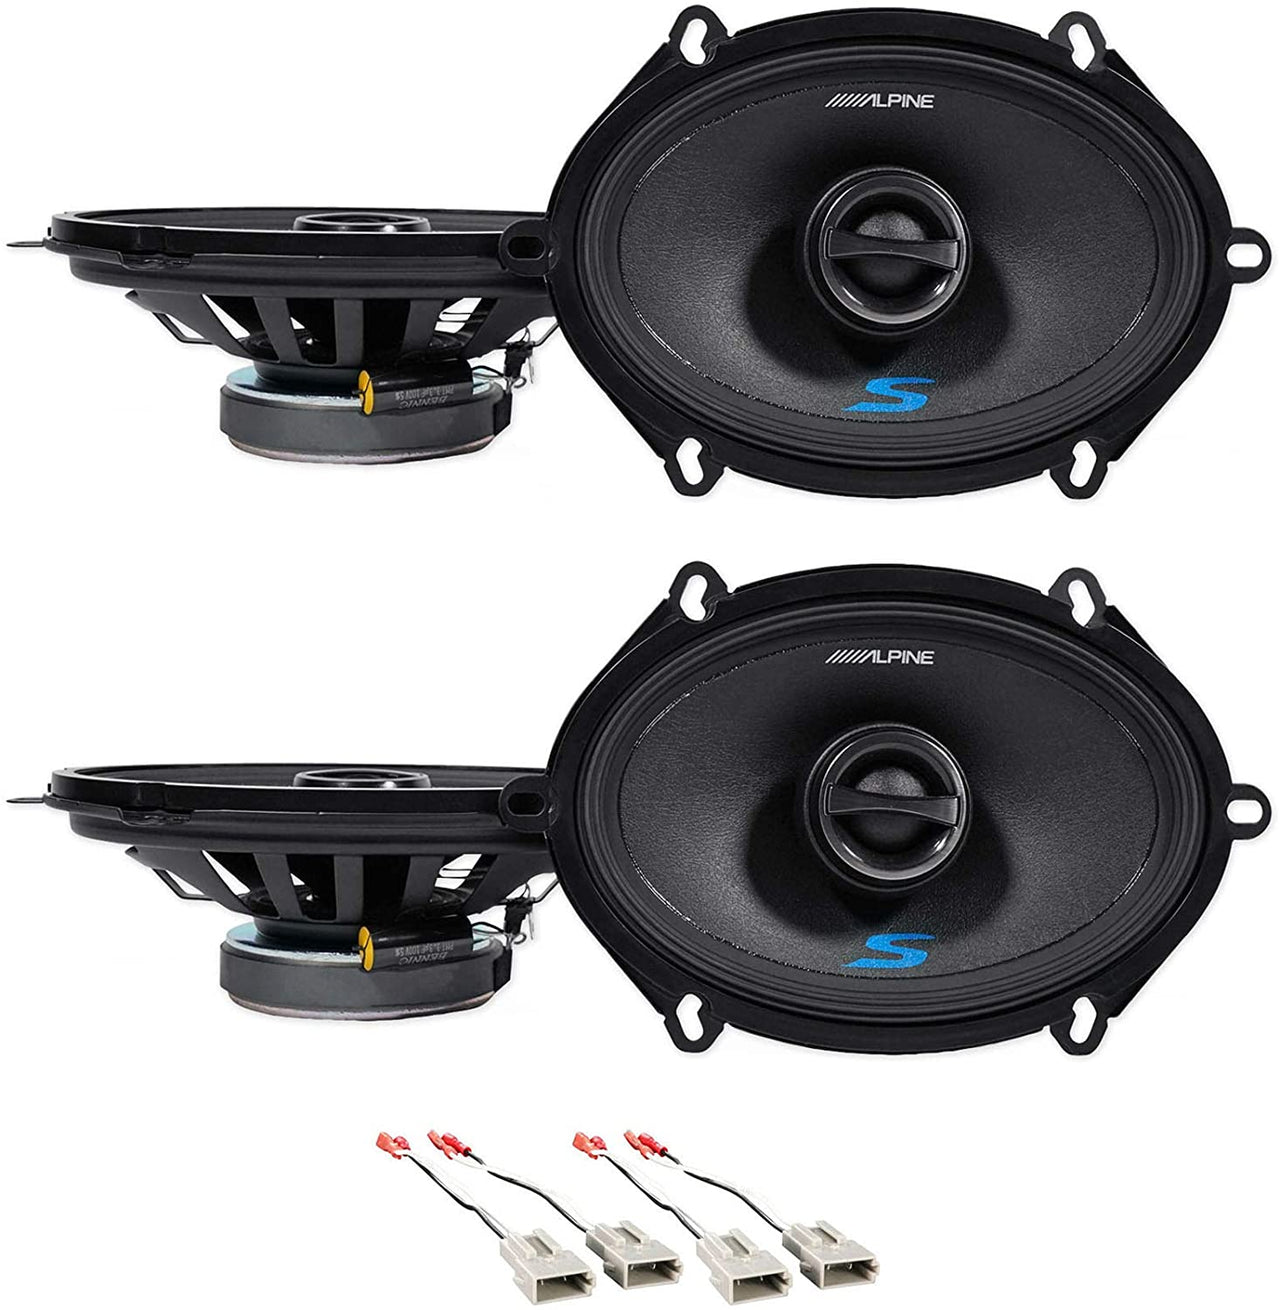 Alpine S-S57 5x7" Front Factory Speaker Replacement Kit For 1995-2003 Ford Windstar + Metra 72-5512 Speaker Harness